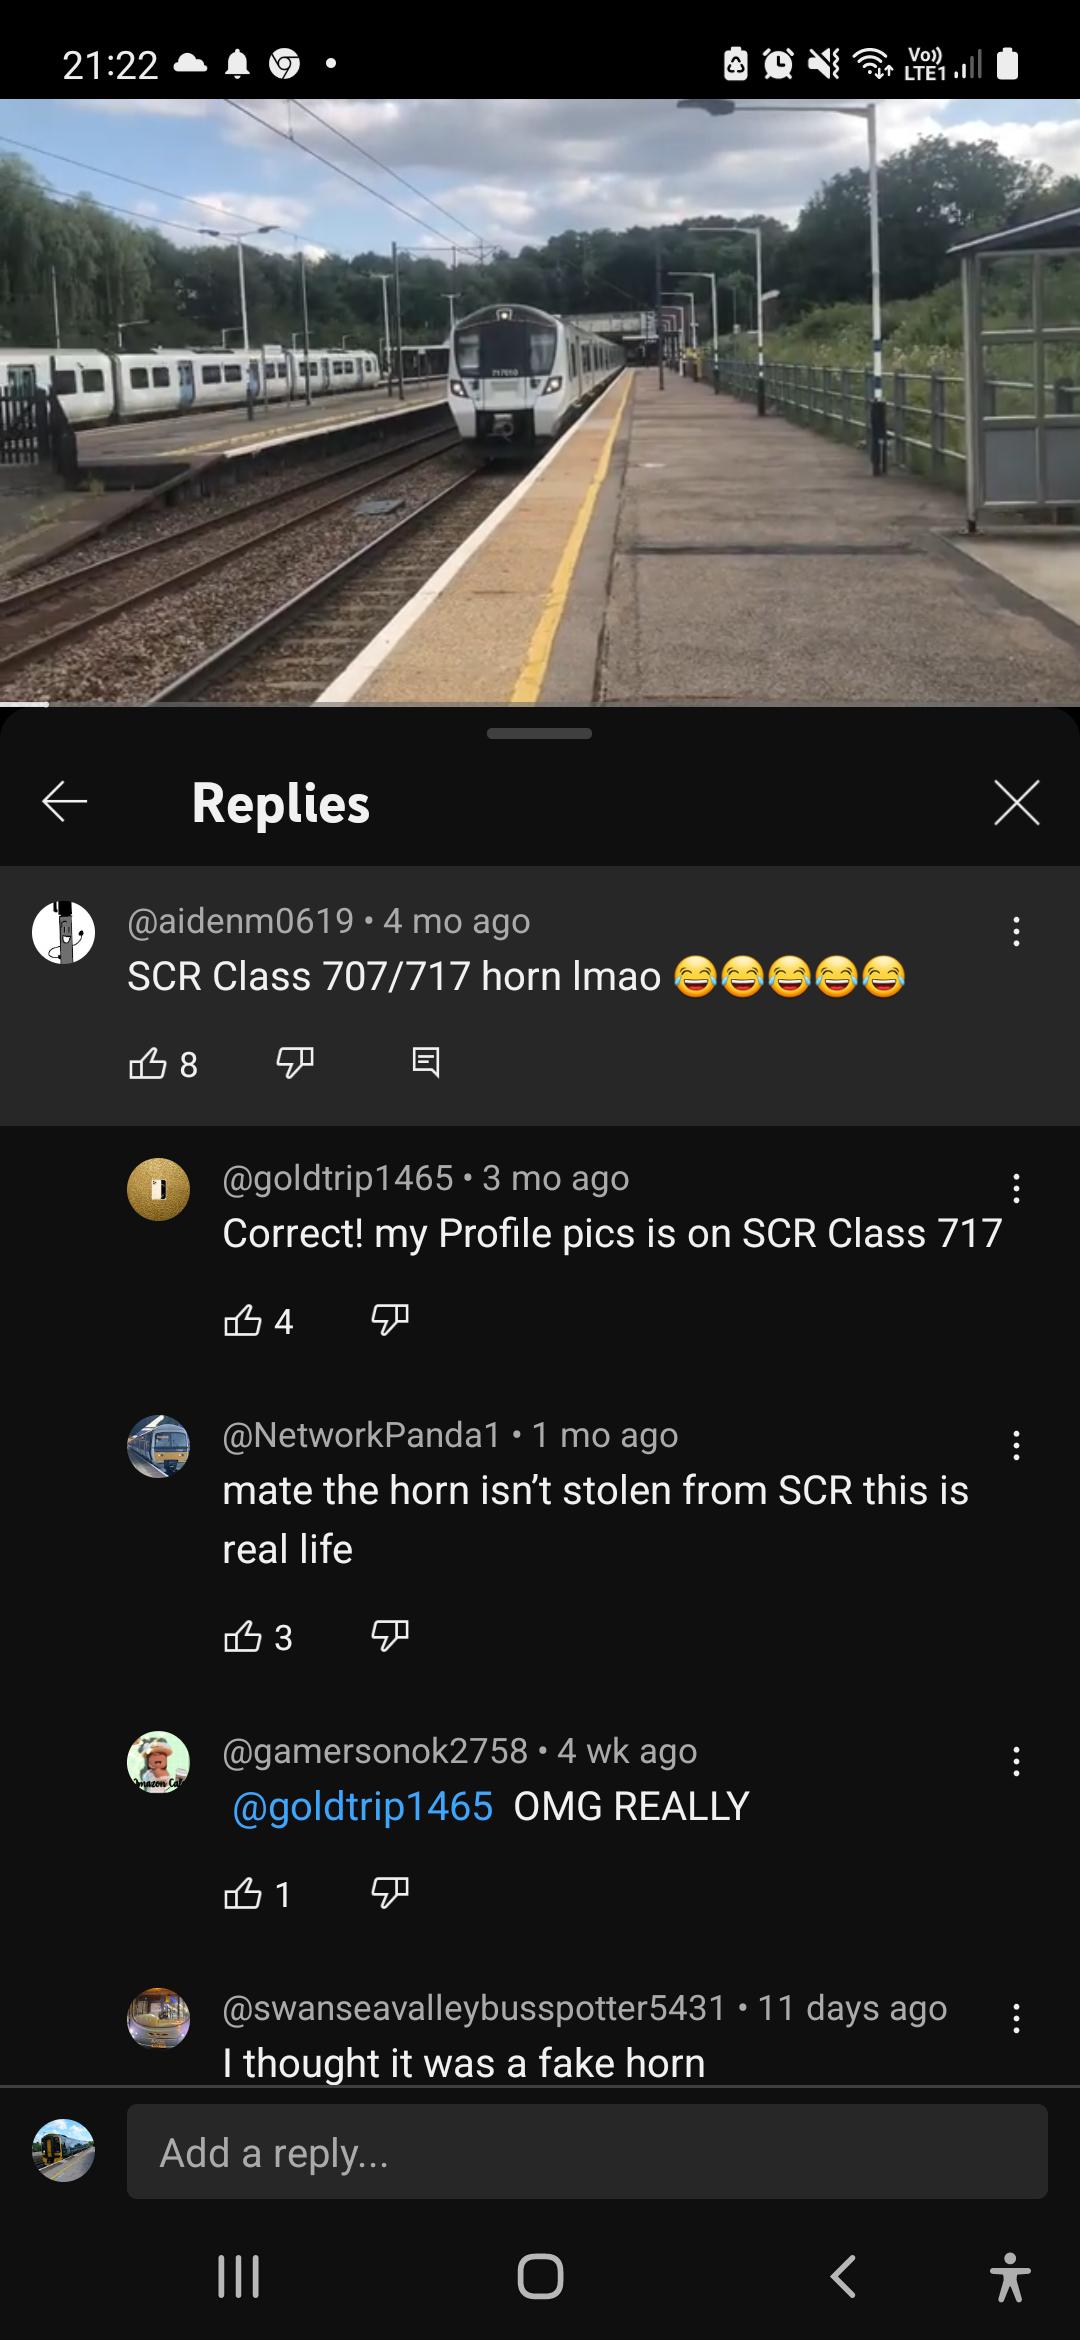 people who missed the joke - screenshot - 4 mo ago Scr Class 707717 horn Imao Toote Ma Replies 8 mazon Cal 1 mo ago mate the horn isn't stolen from Scr this is real life 3 E 3 mo ago Correct! my Profile pics is on Scr Class 717 B4 4 wk ago Omg Really B1 A